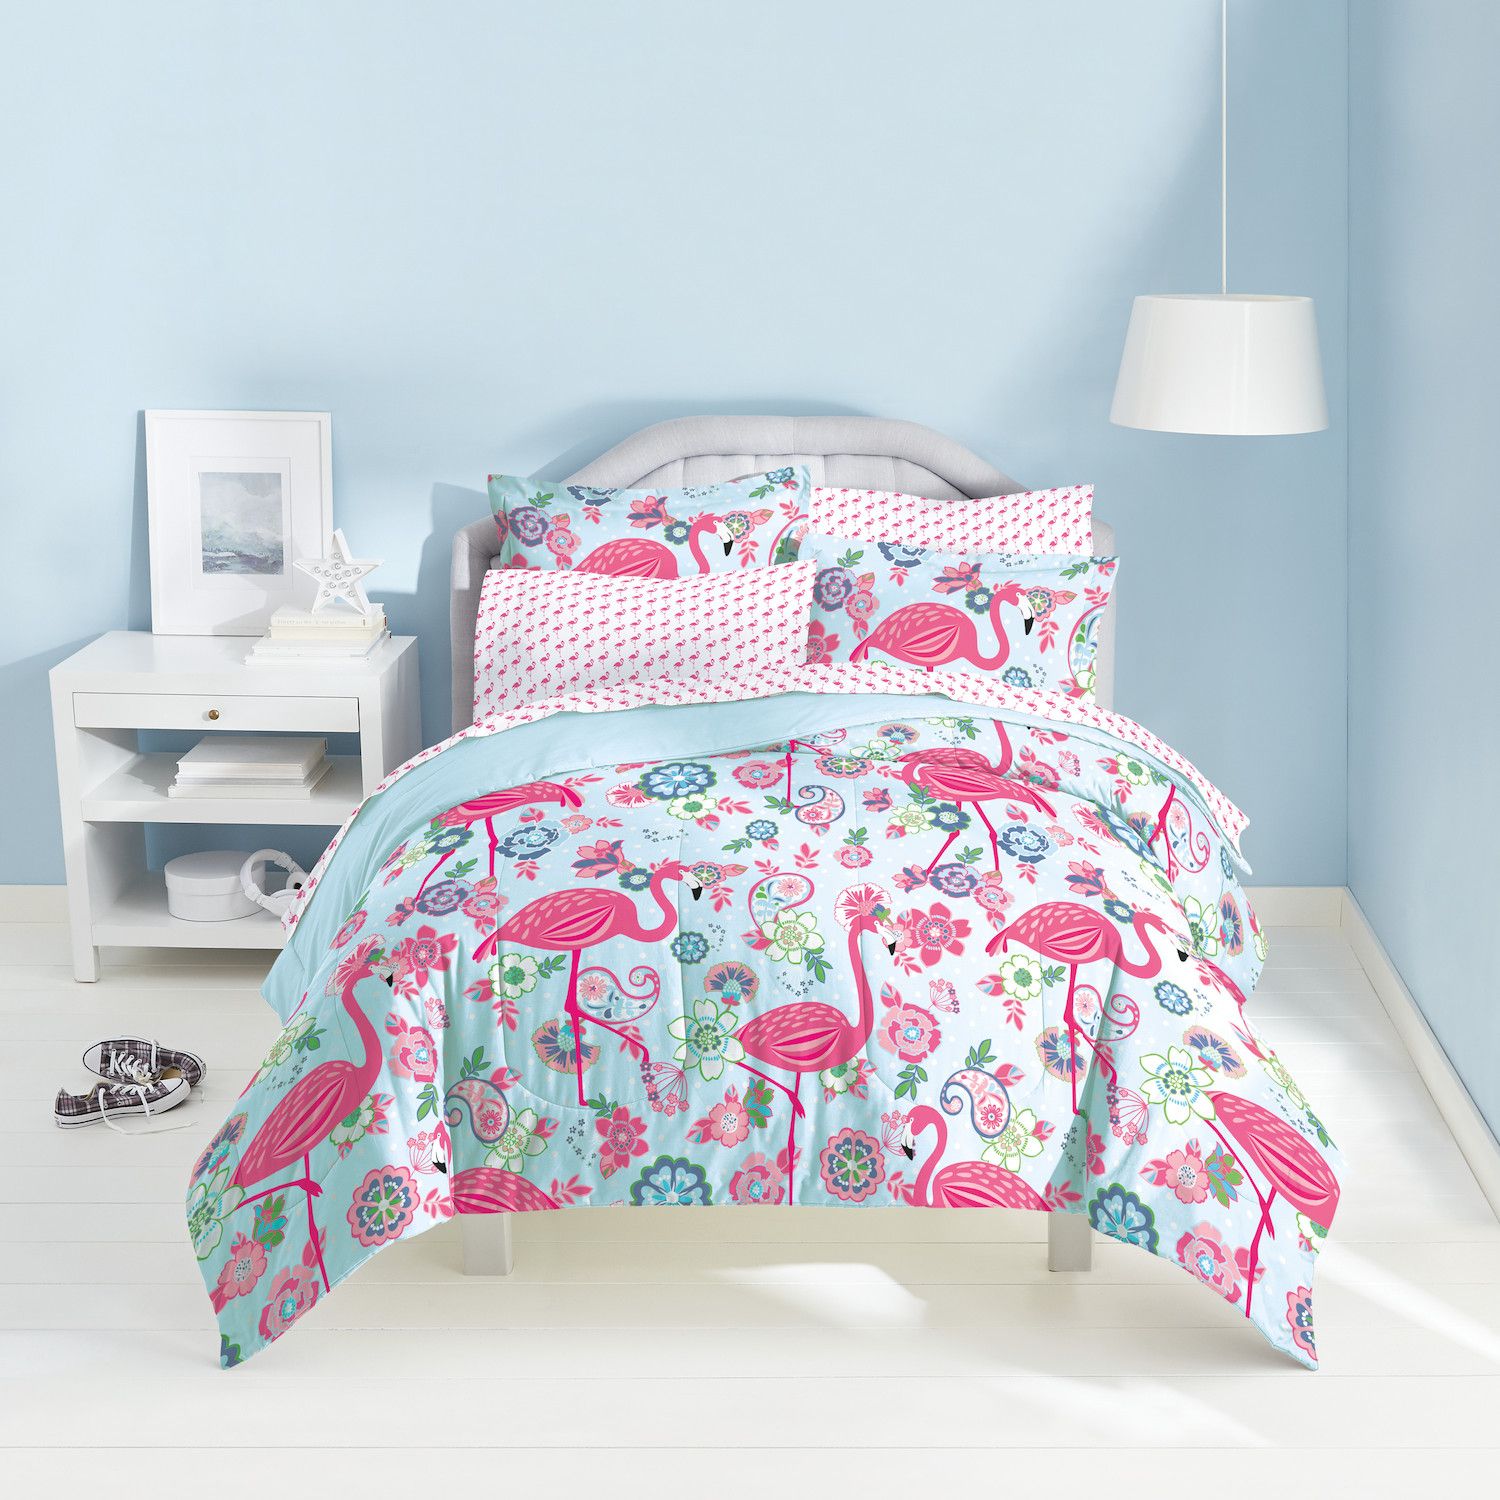 Image for Dream Factory Flamingo Bed Set at Kohl's.